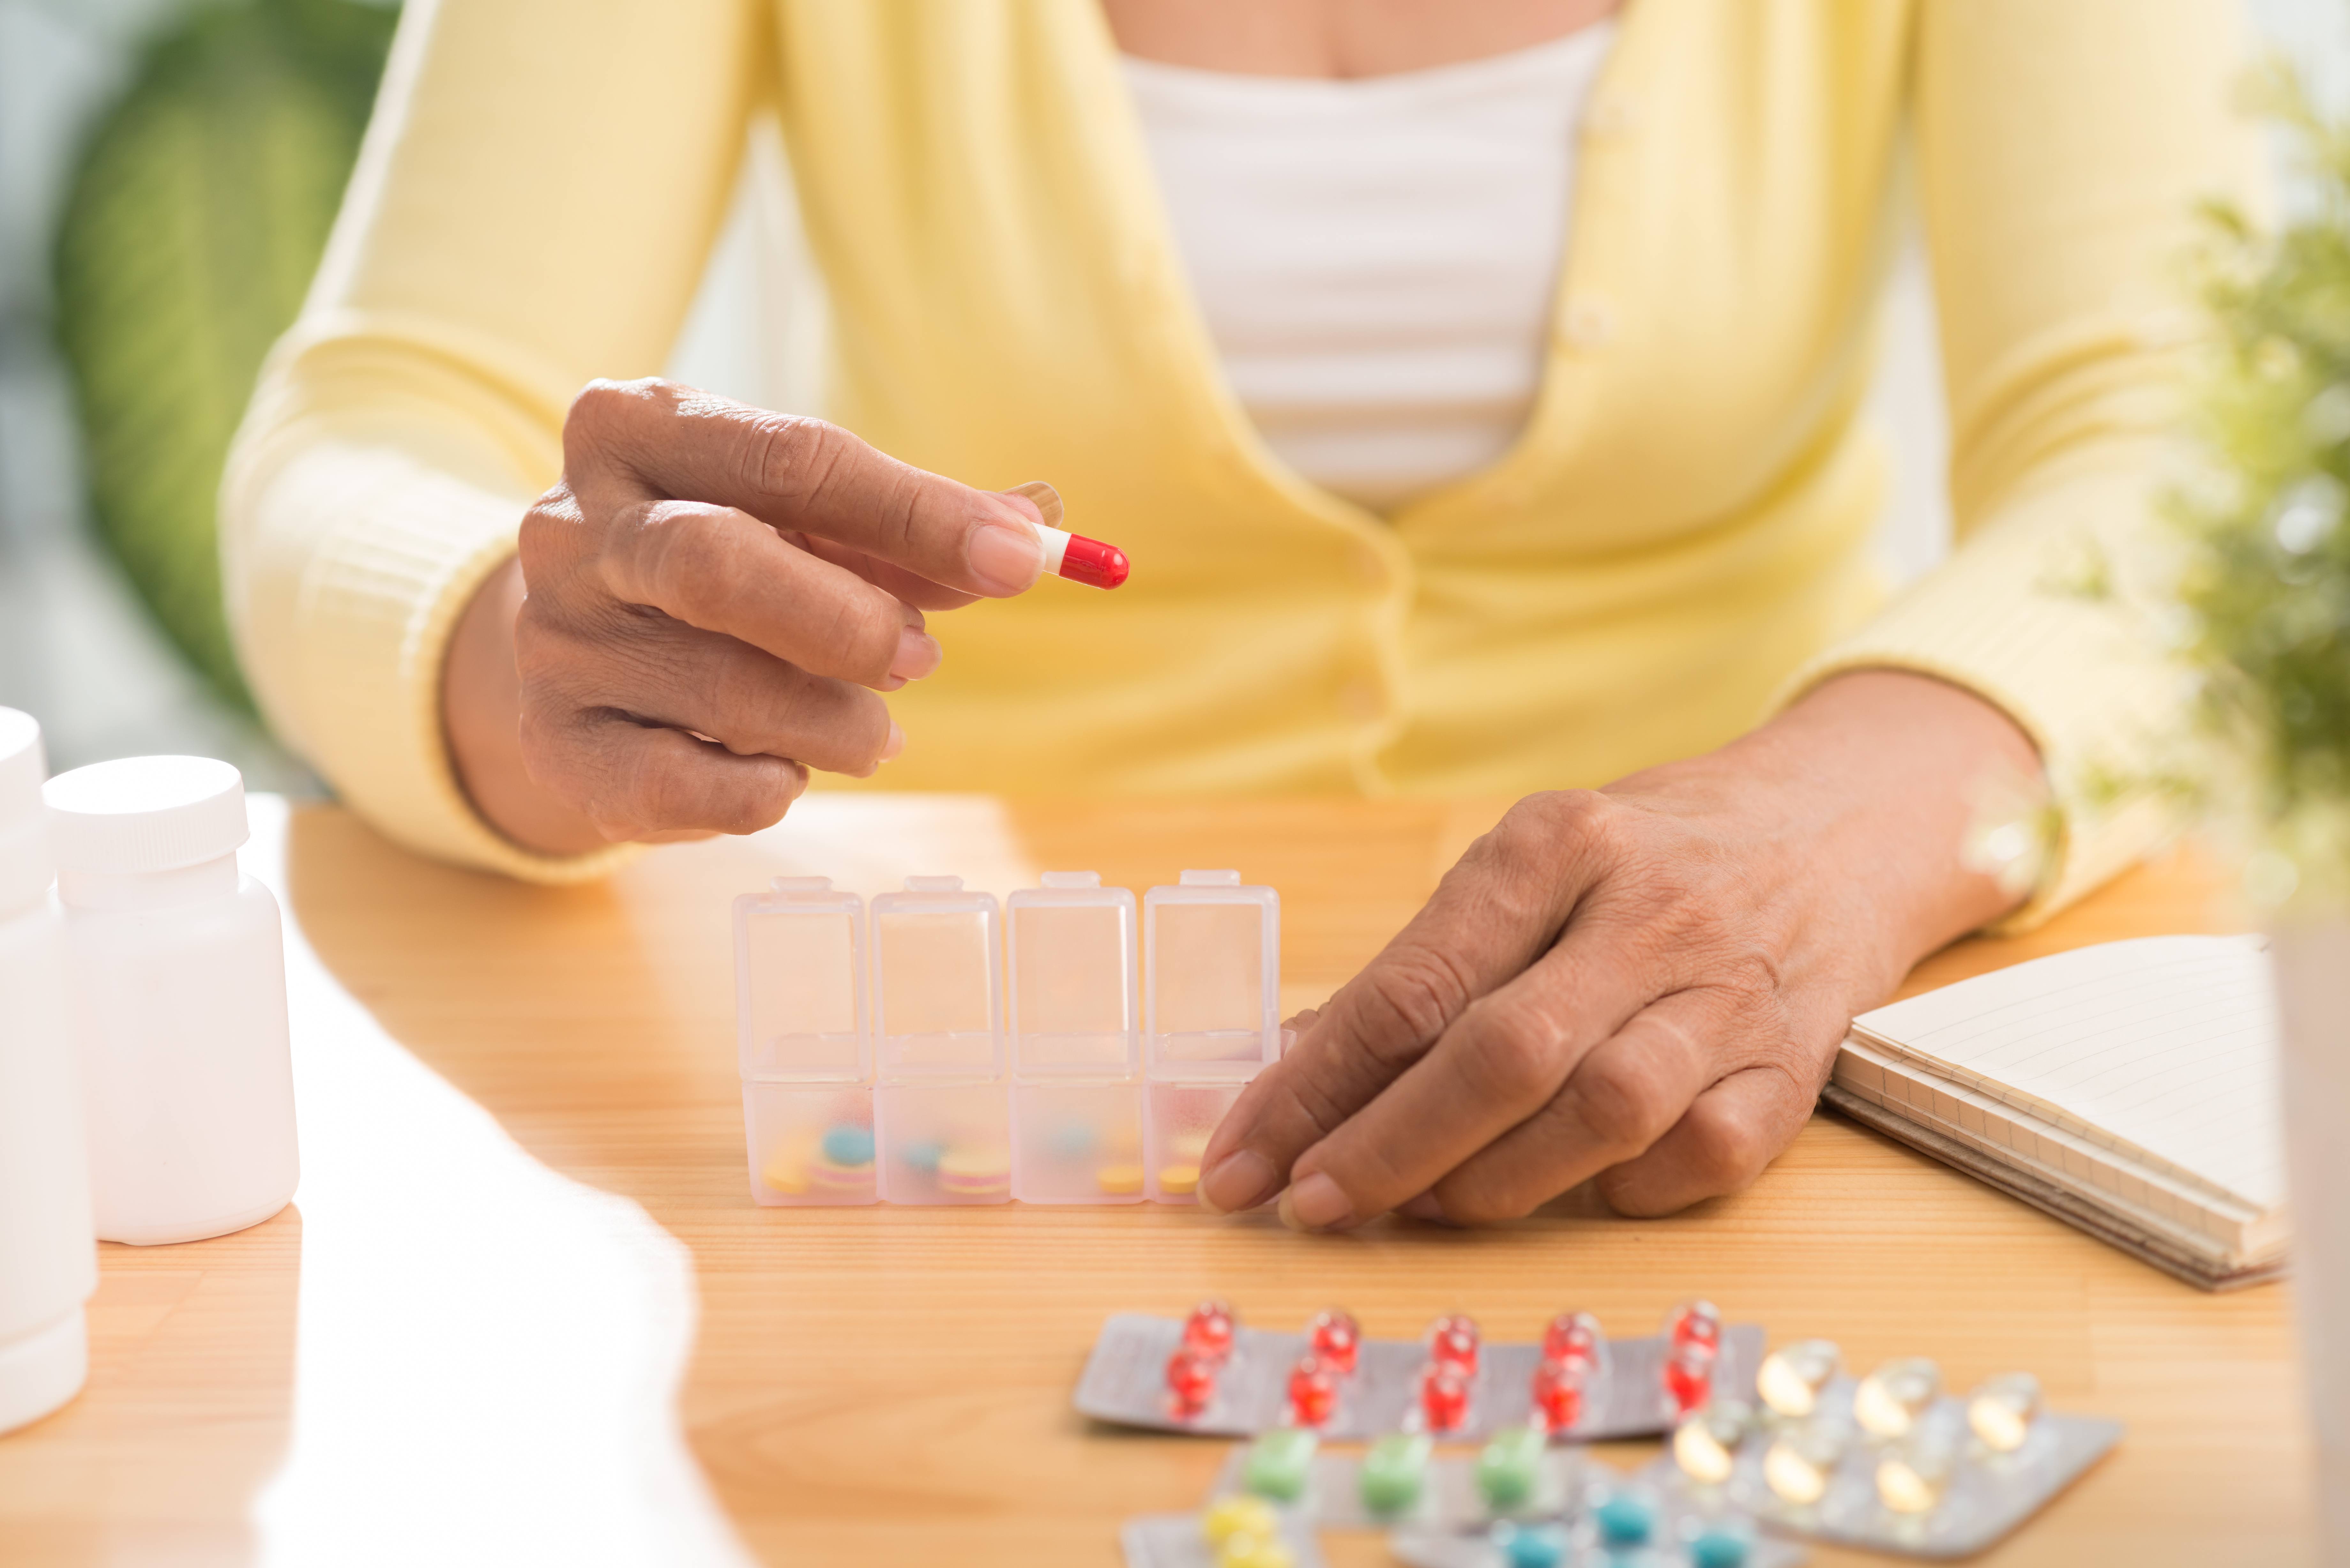 a woman in a yellow sweater sitting at a table with her prescription medicine and putting her pills in a pillbox